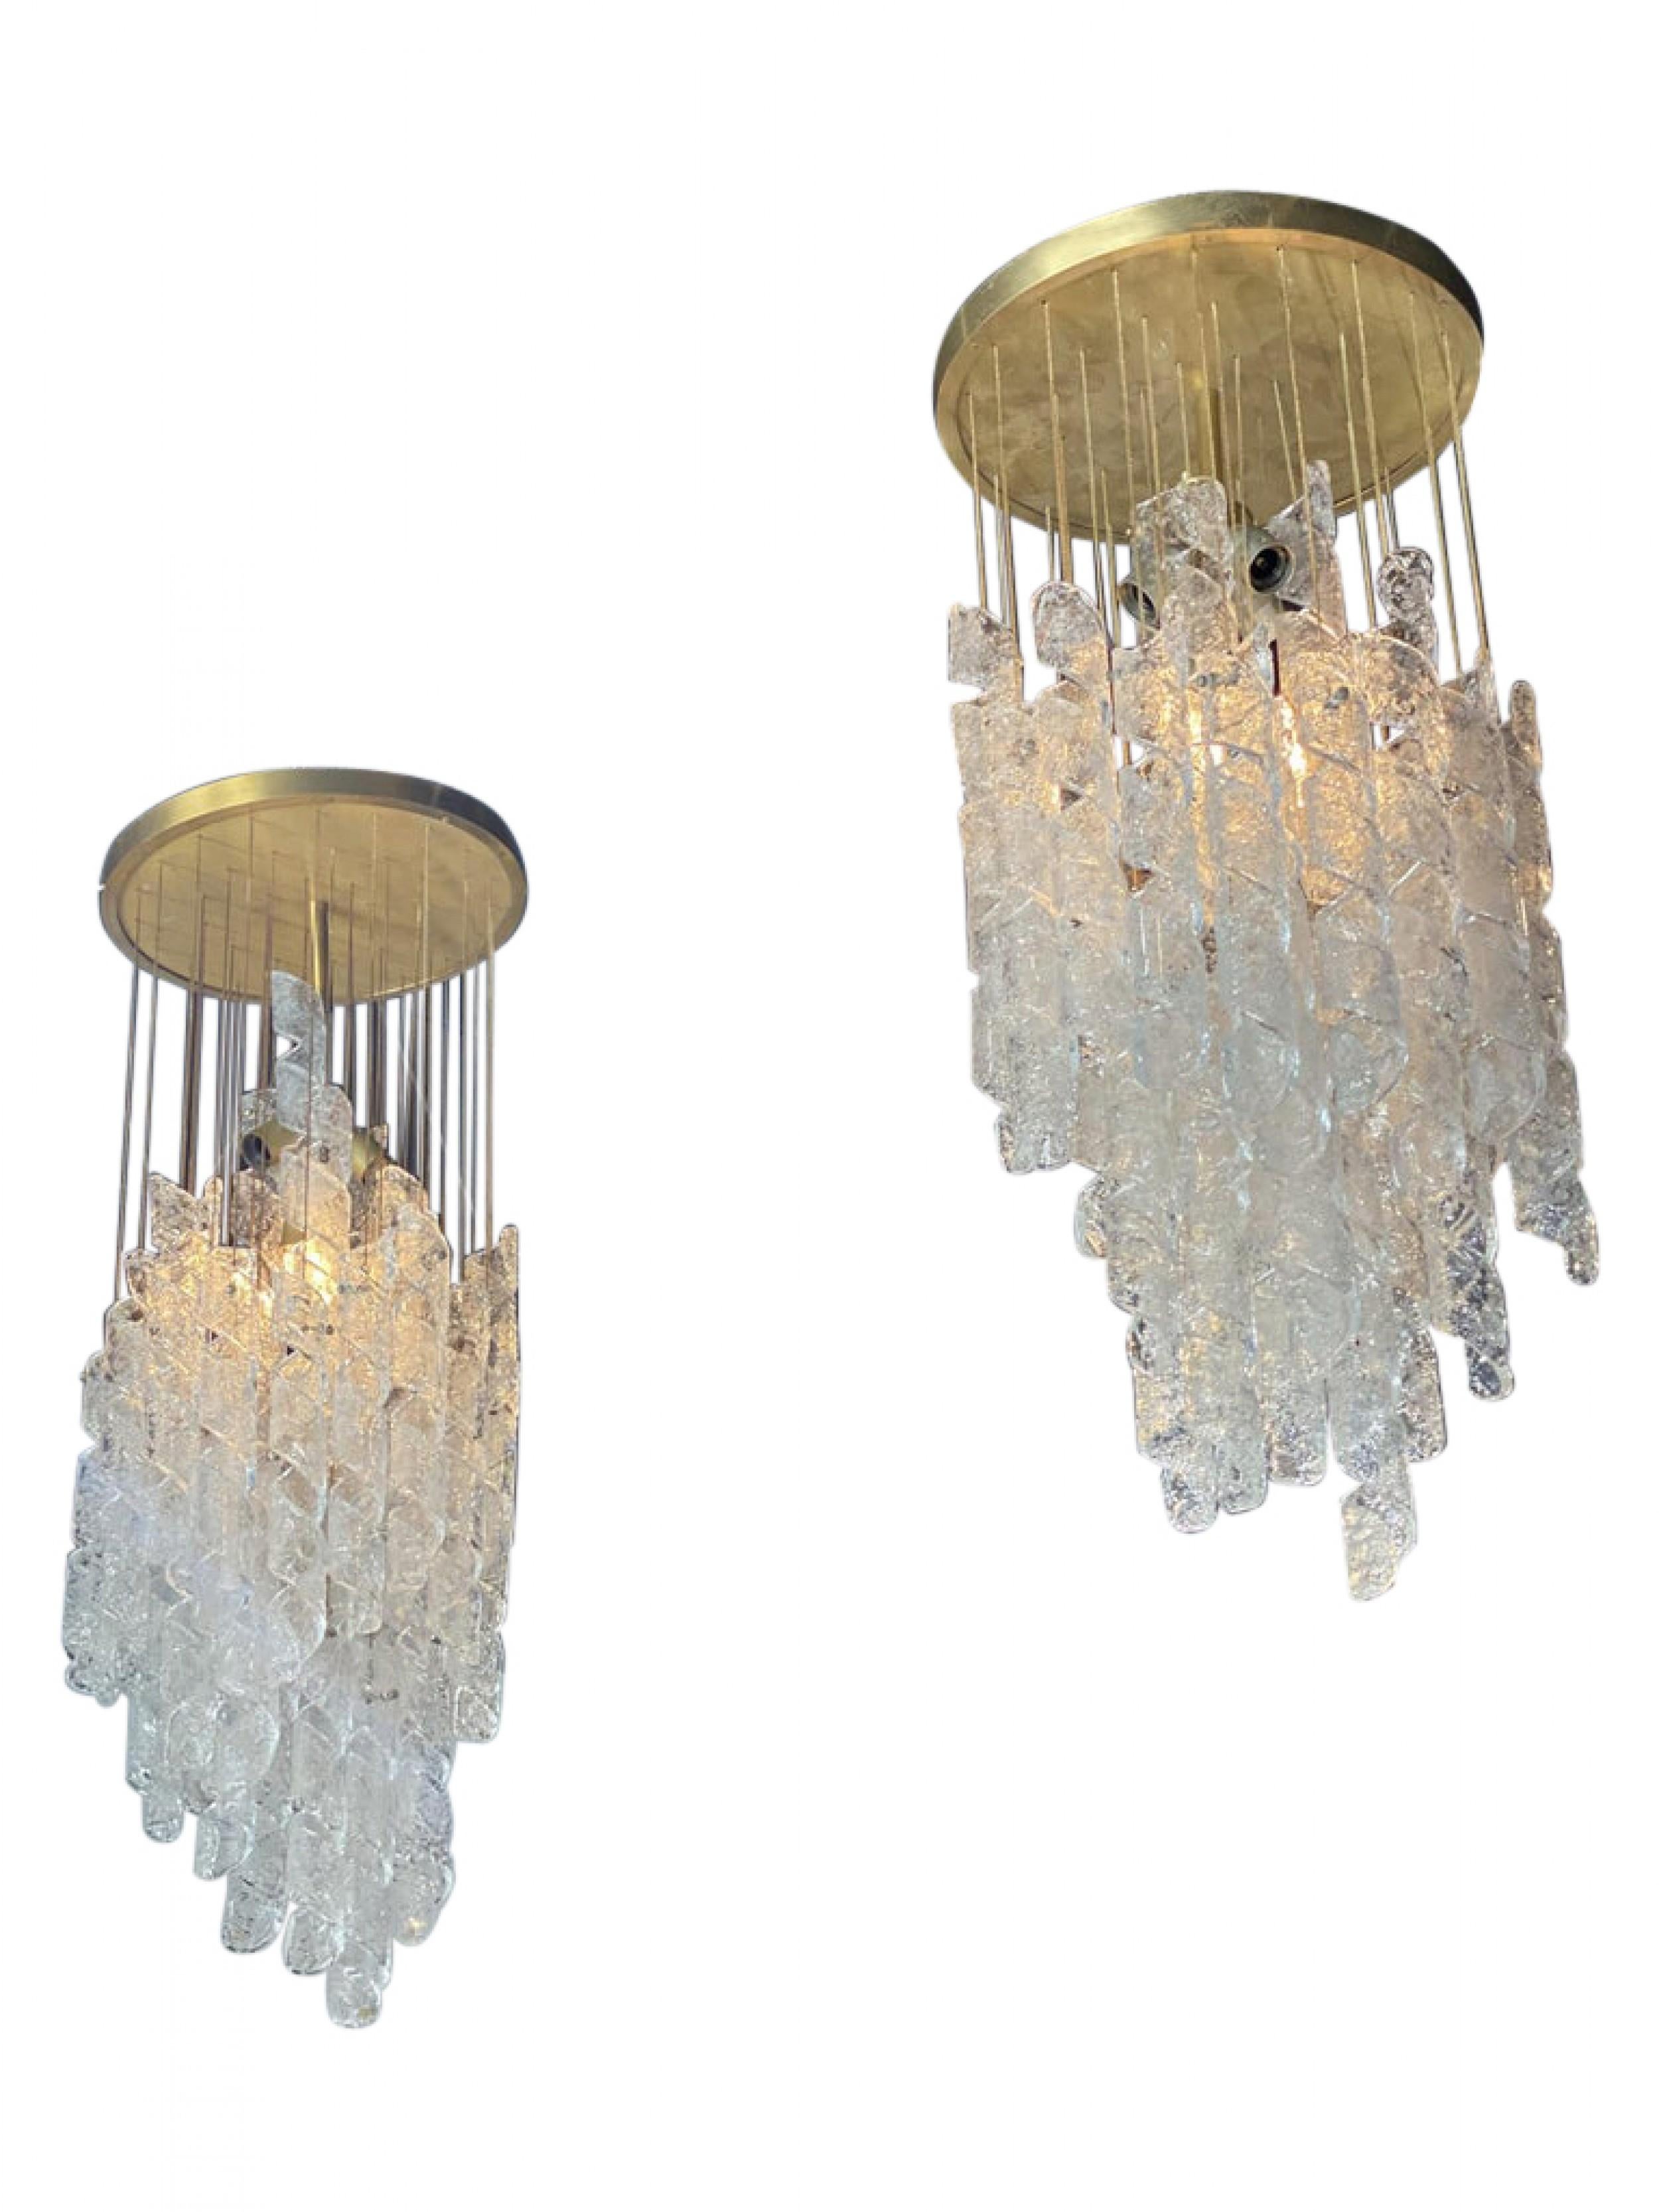 Mid-Century Modern Pair of Italian Modern Hand Blown Glass and Brass Chandeliers, Mazzega For Sale